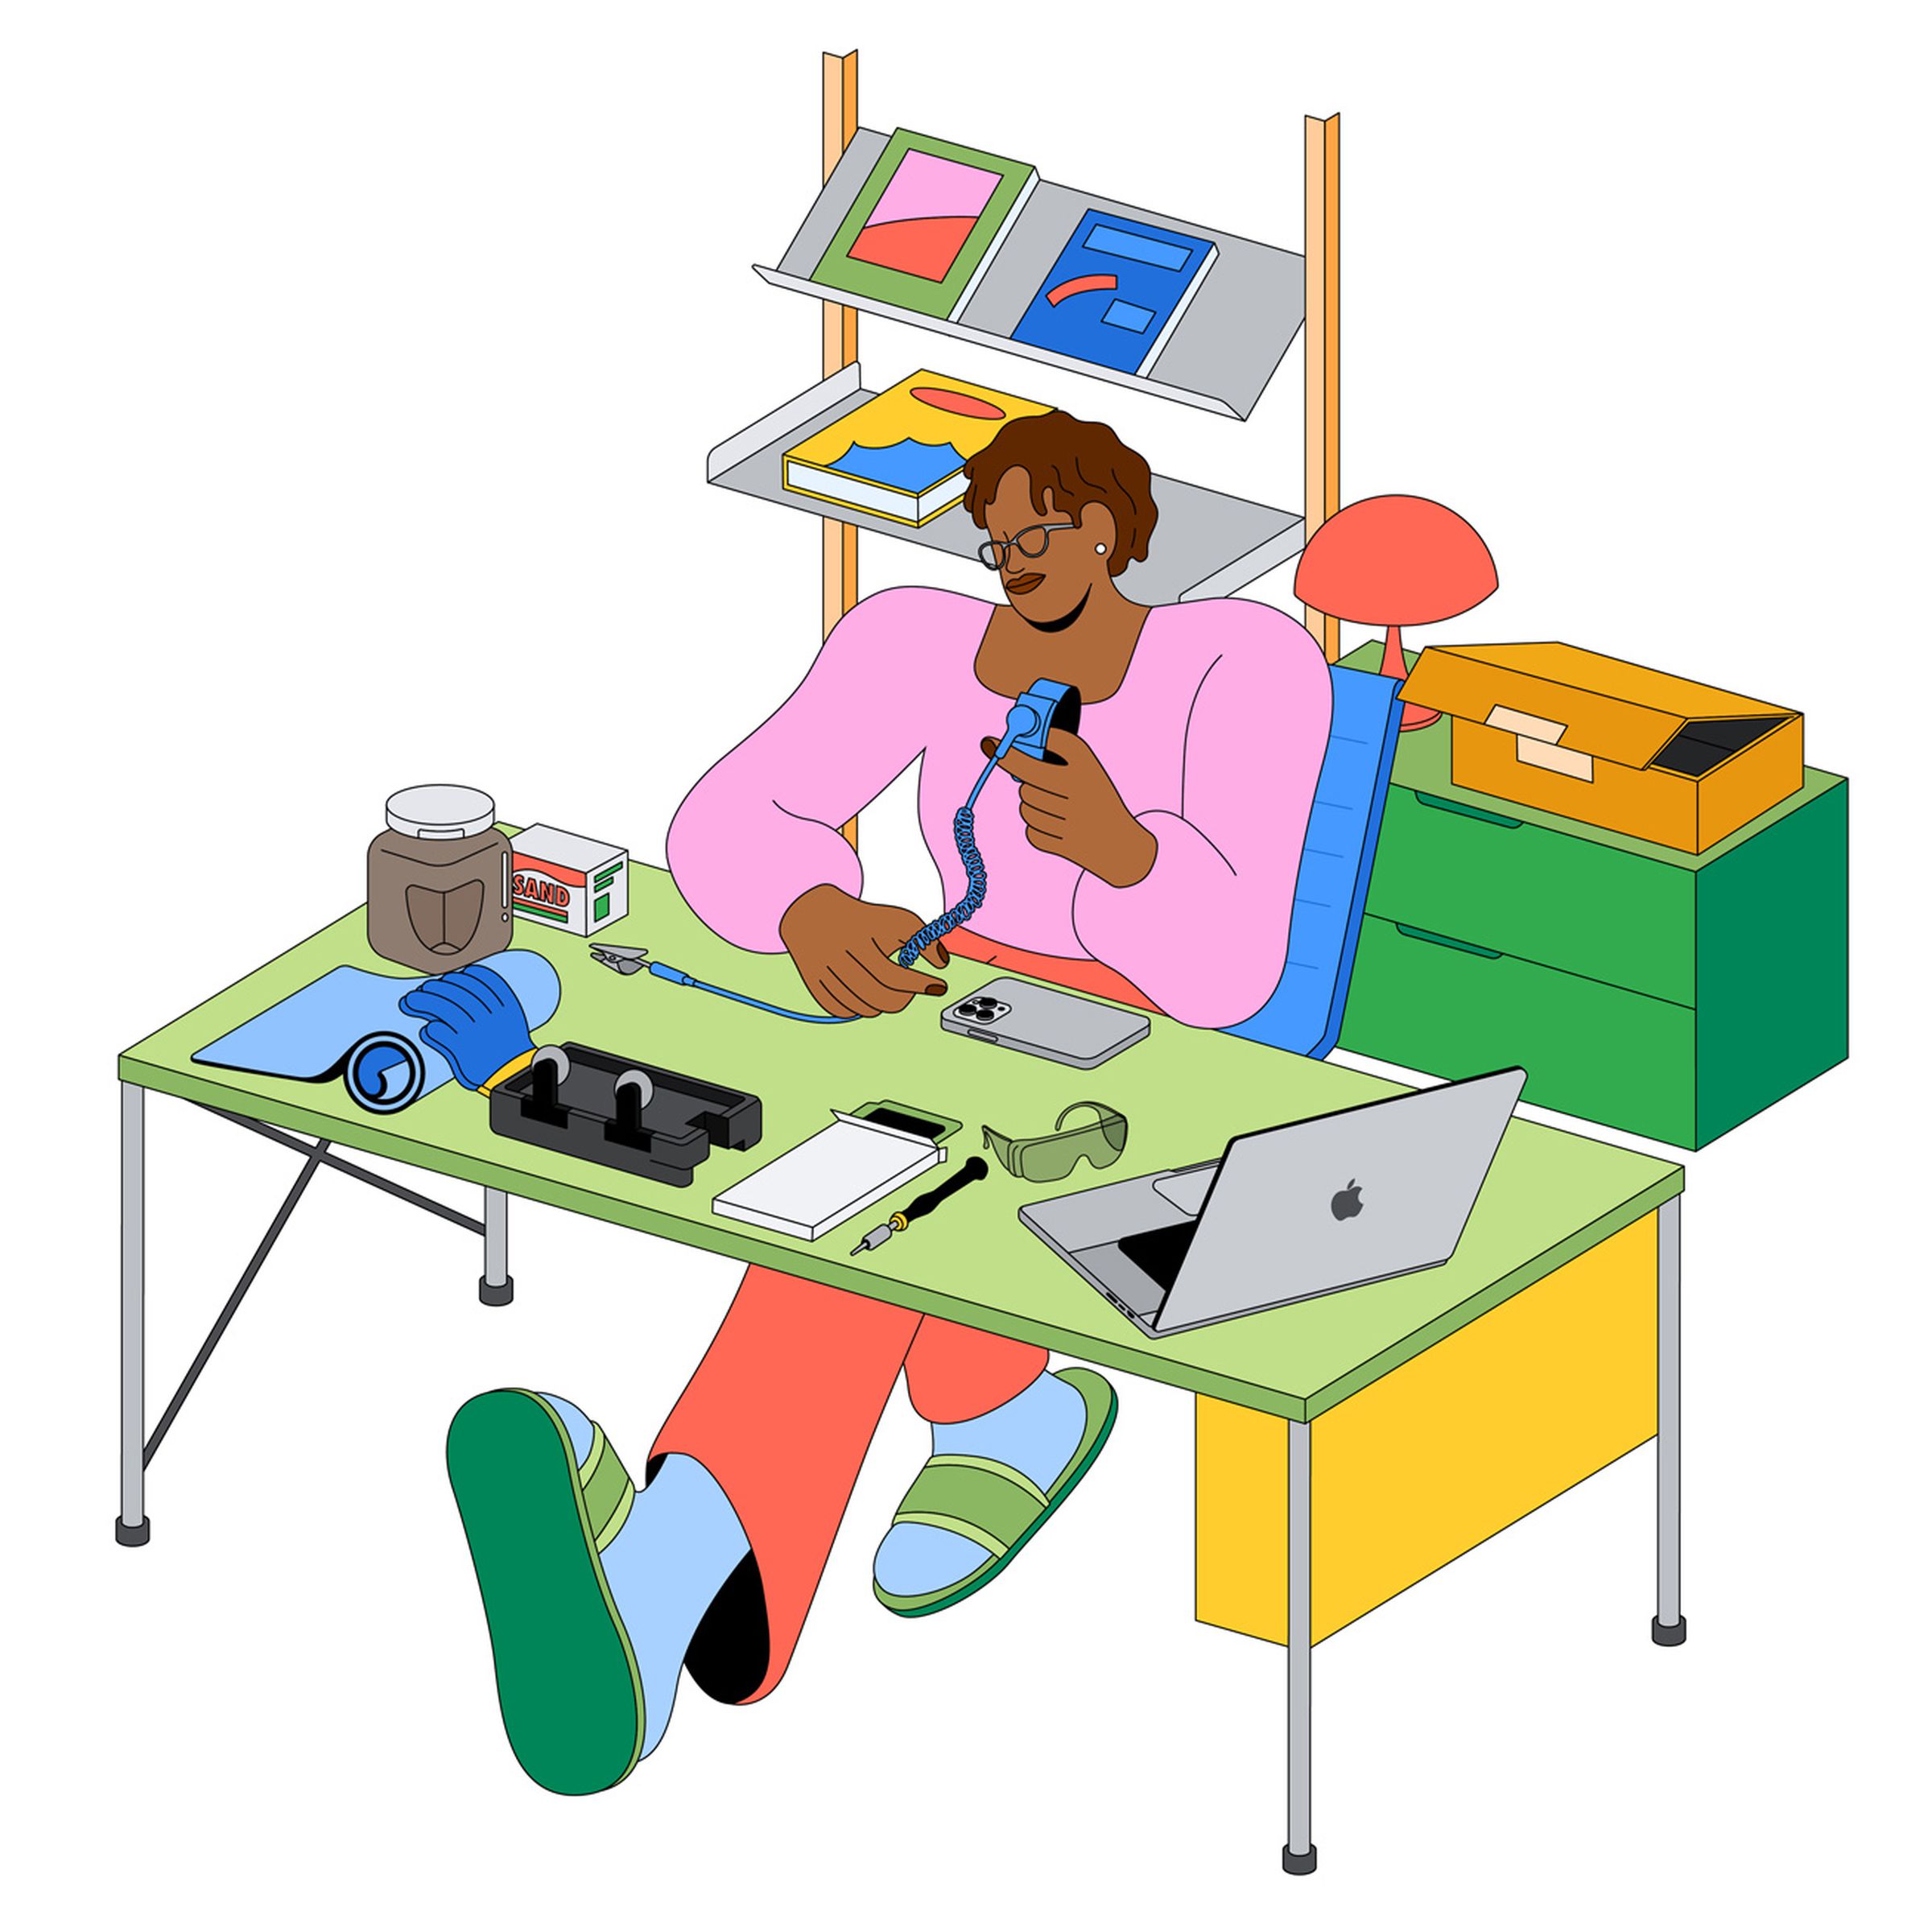 Illustration of girl at a workbench with various tools preparing to work on a replacement screen for an iPhone 12 or 13 pro